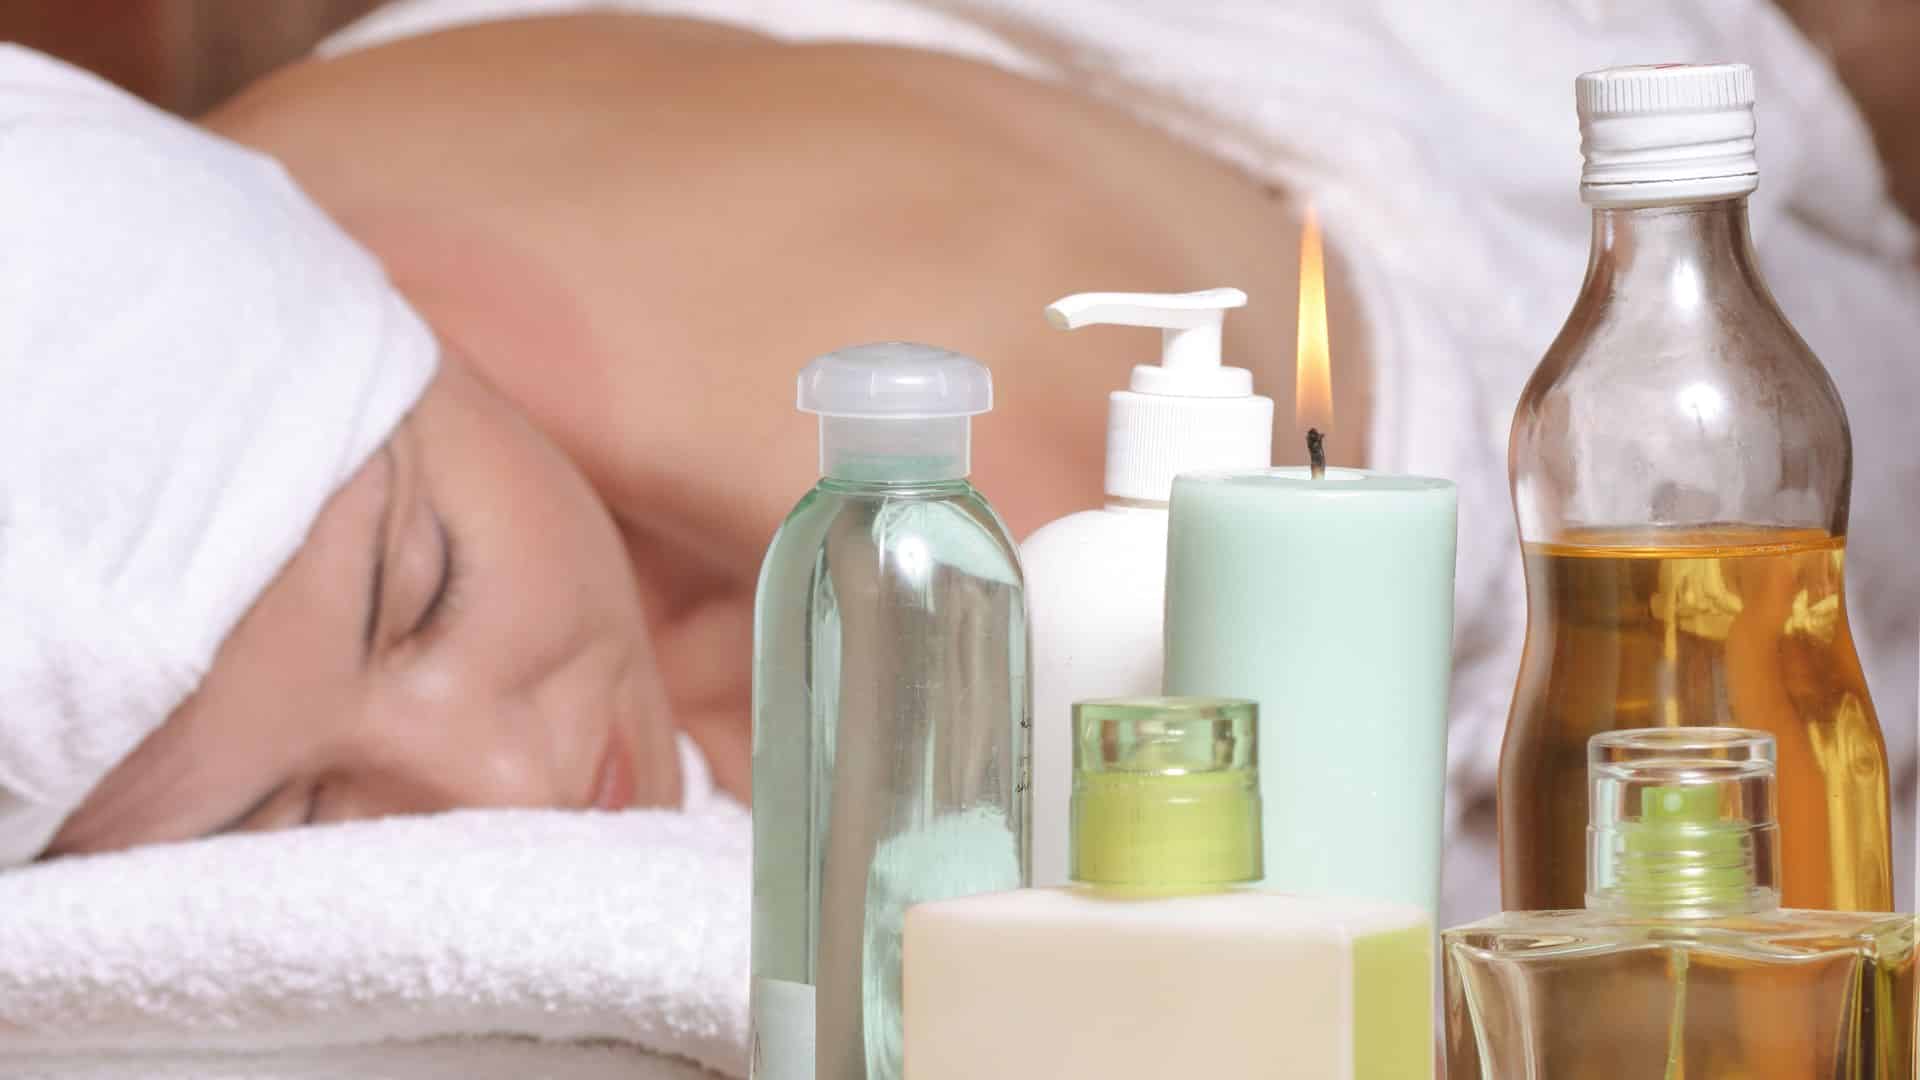 Close up view of woman wrapped in white towel getting a massage with bottles of massage oils and a candle in the foreground